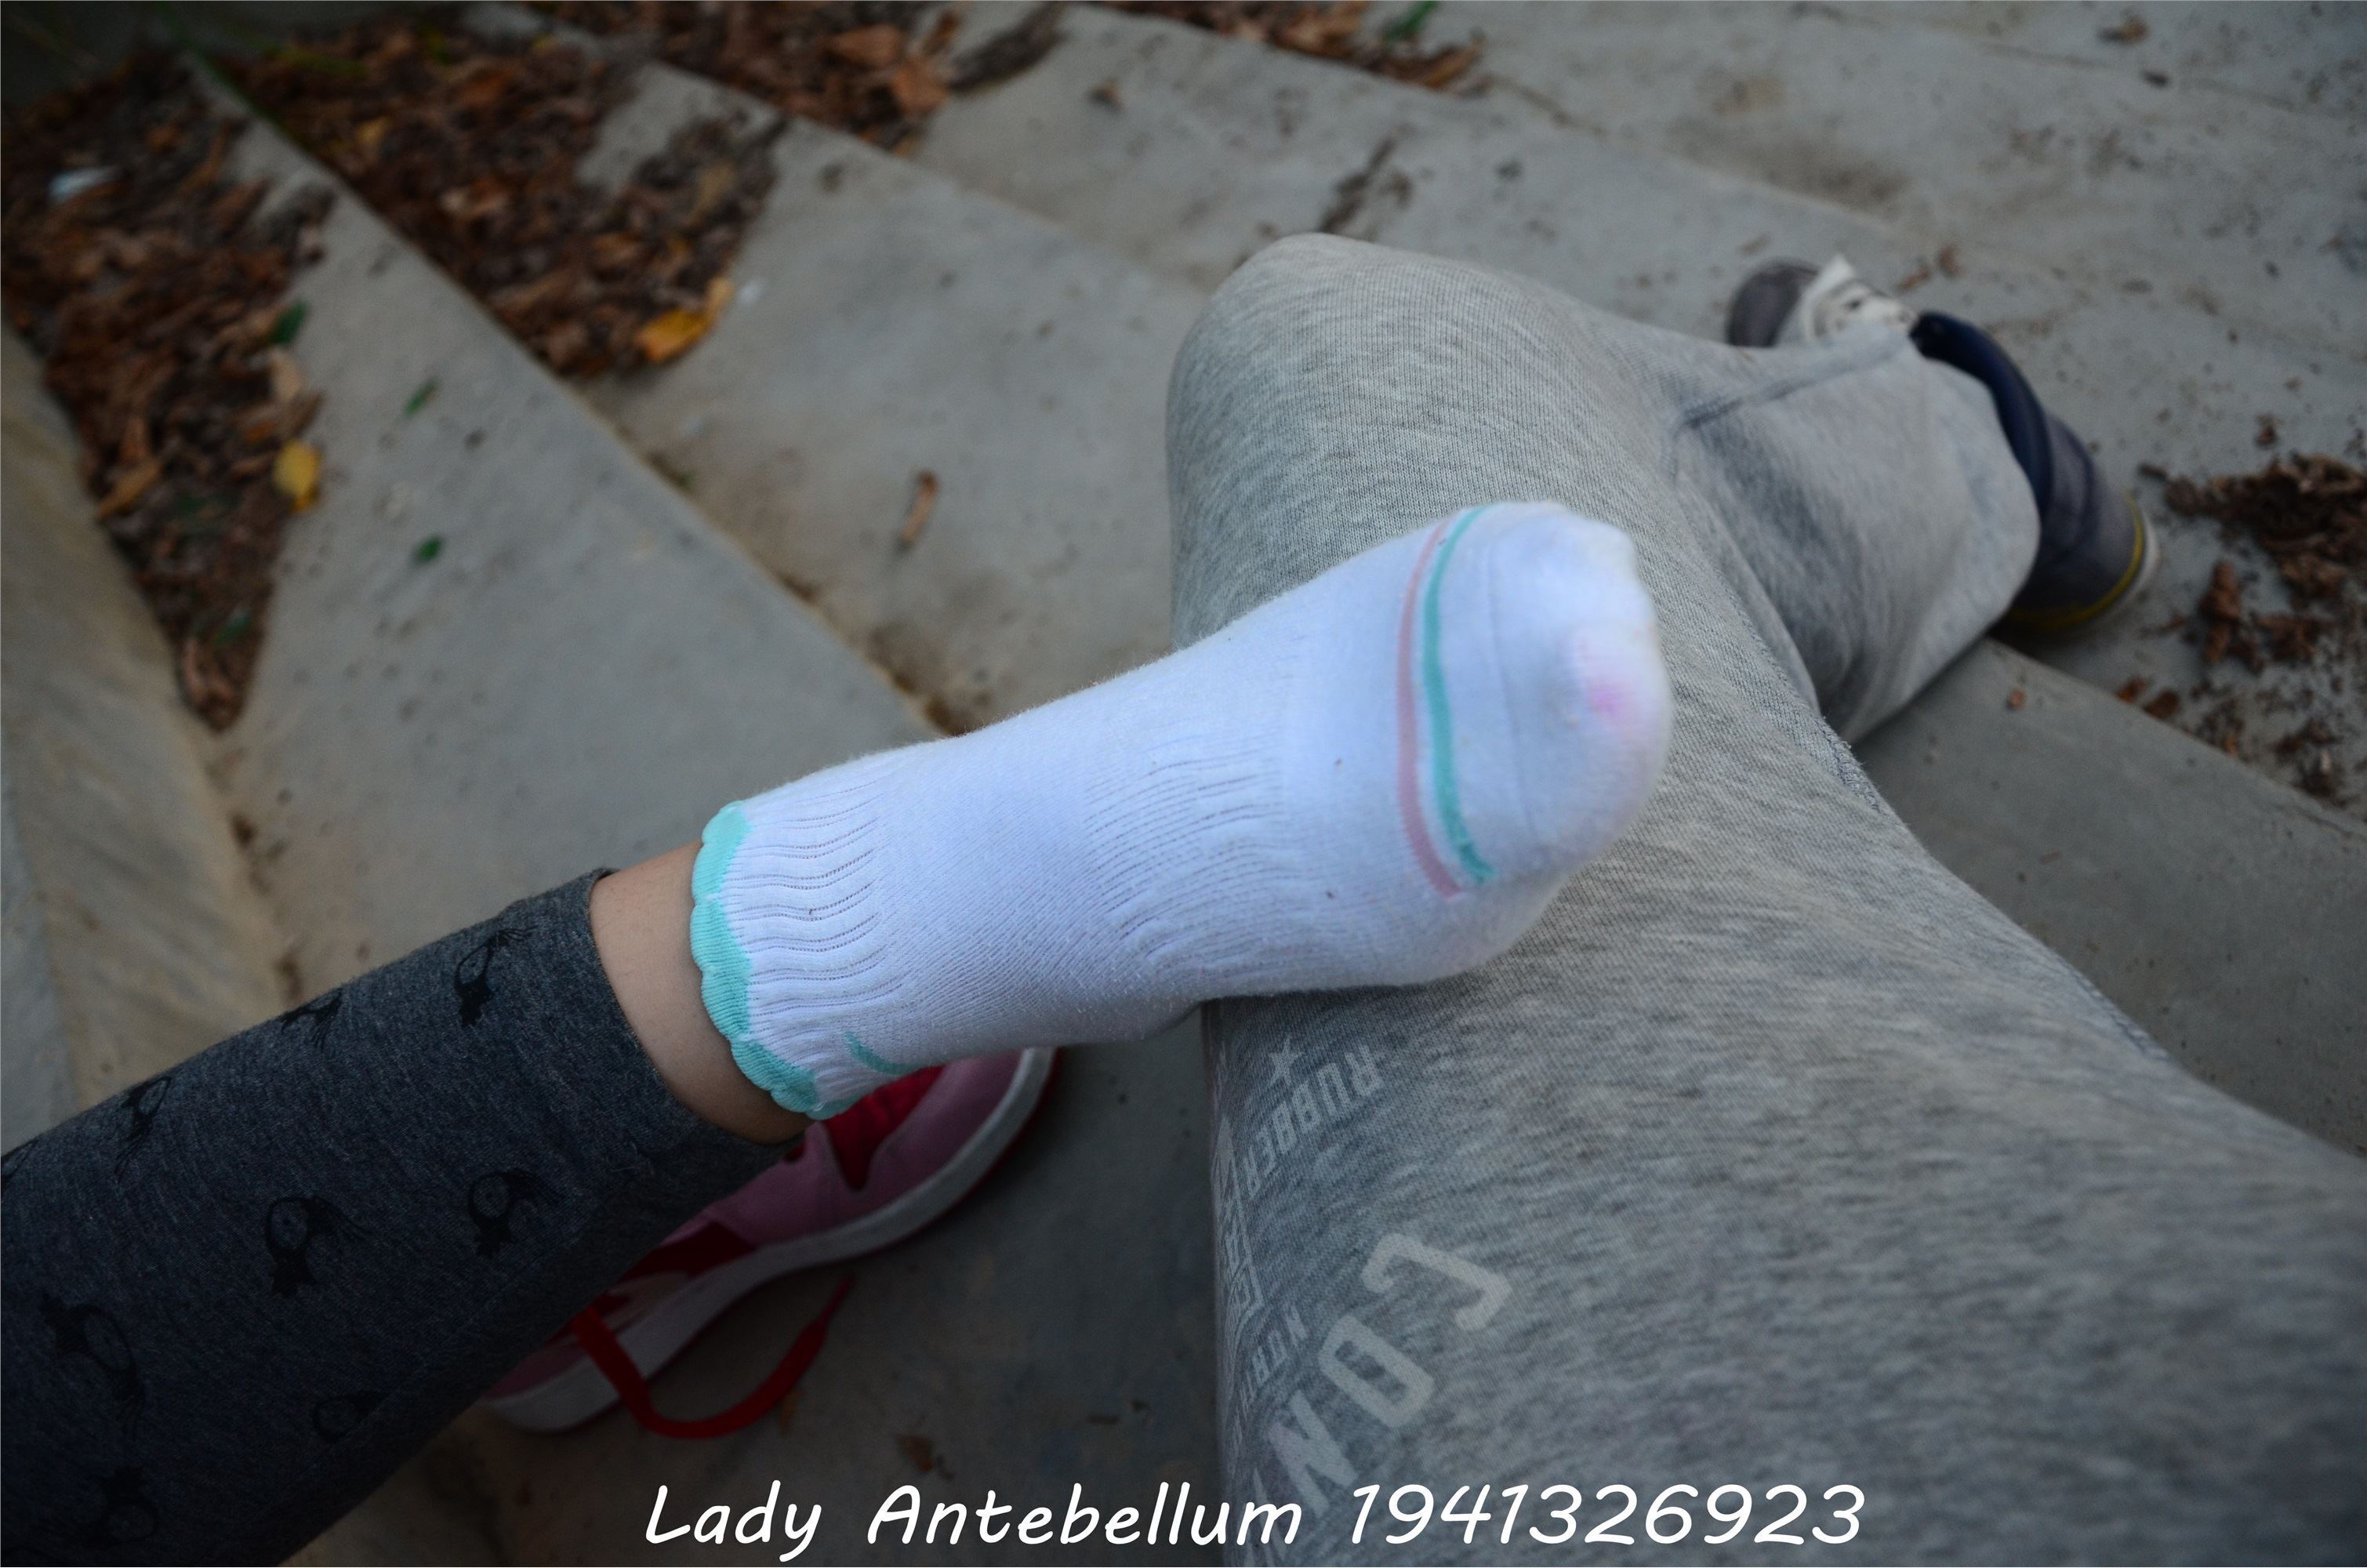 Goddess's feet and legs cotton stockings before the war 095